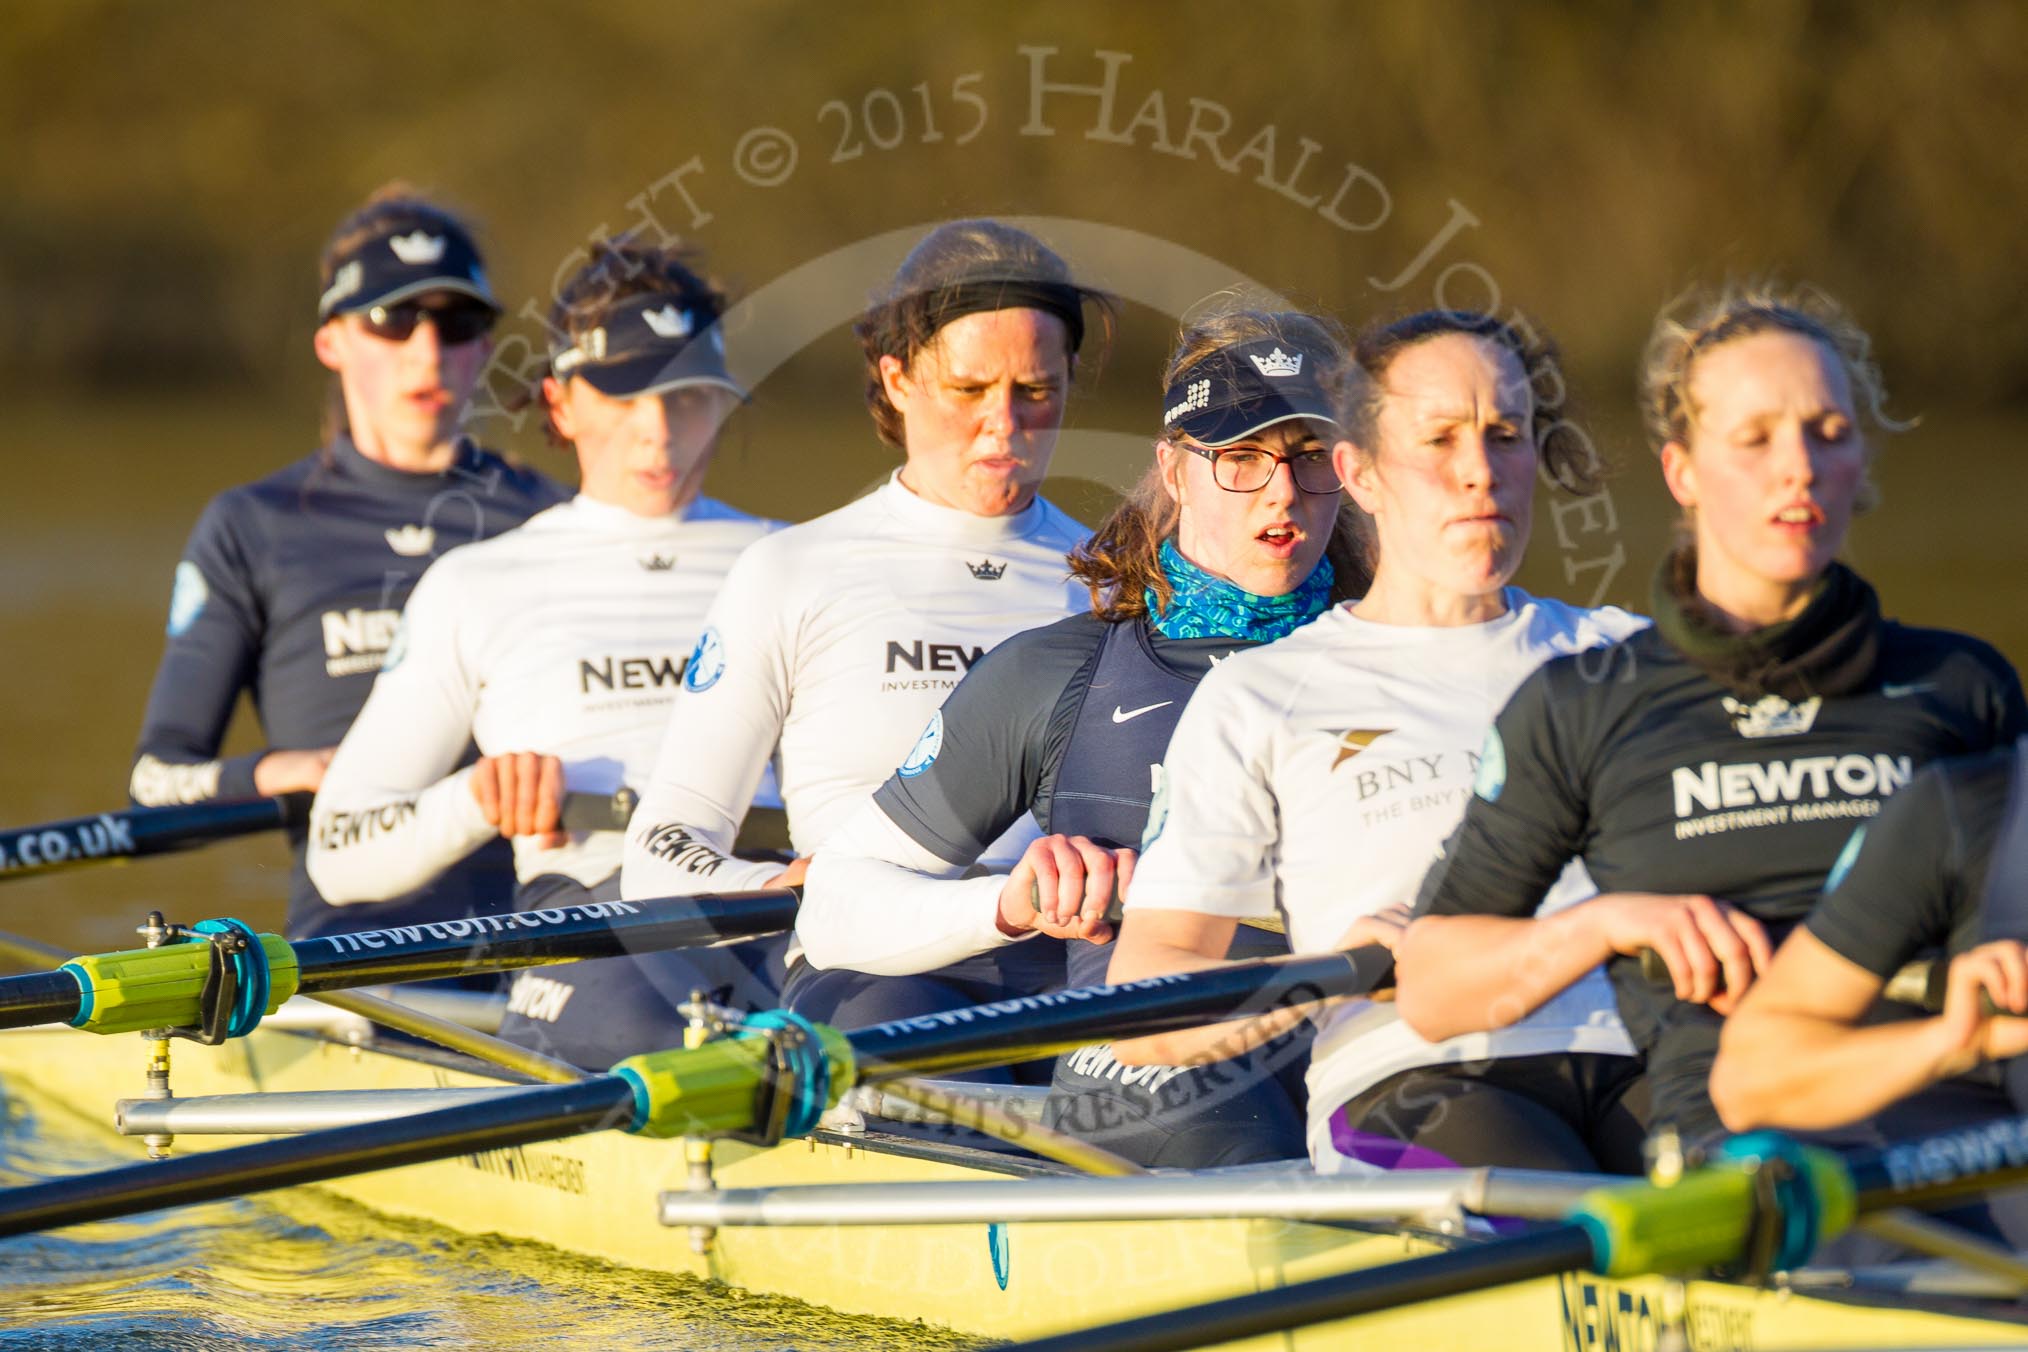 The Boat Race season 2015: OUWBC training Wallingford.

Wallingford,

United Kingdom,
on 04 March 2015 at 17:10, image #267